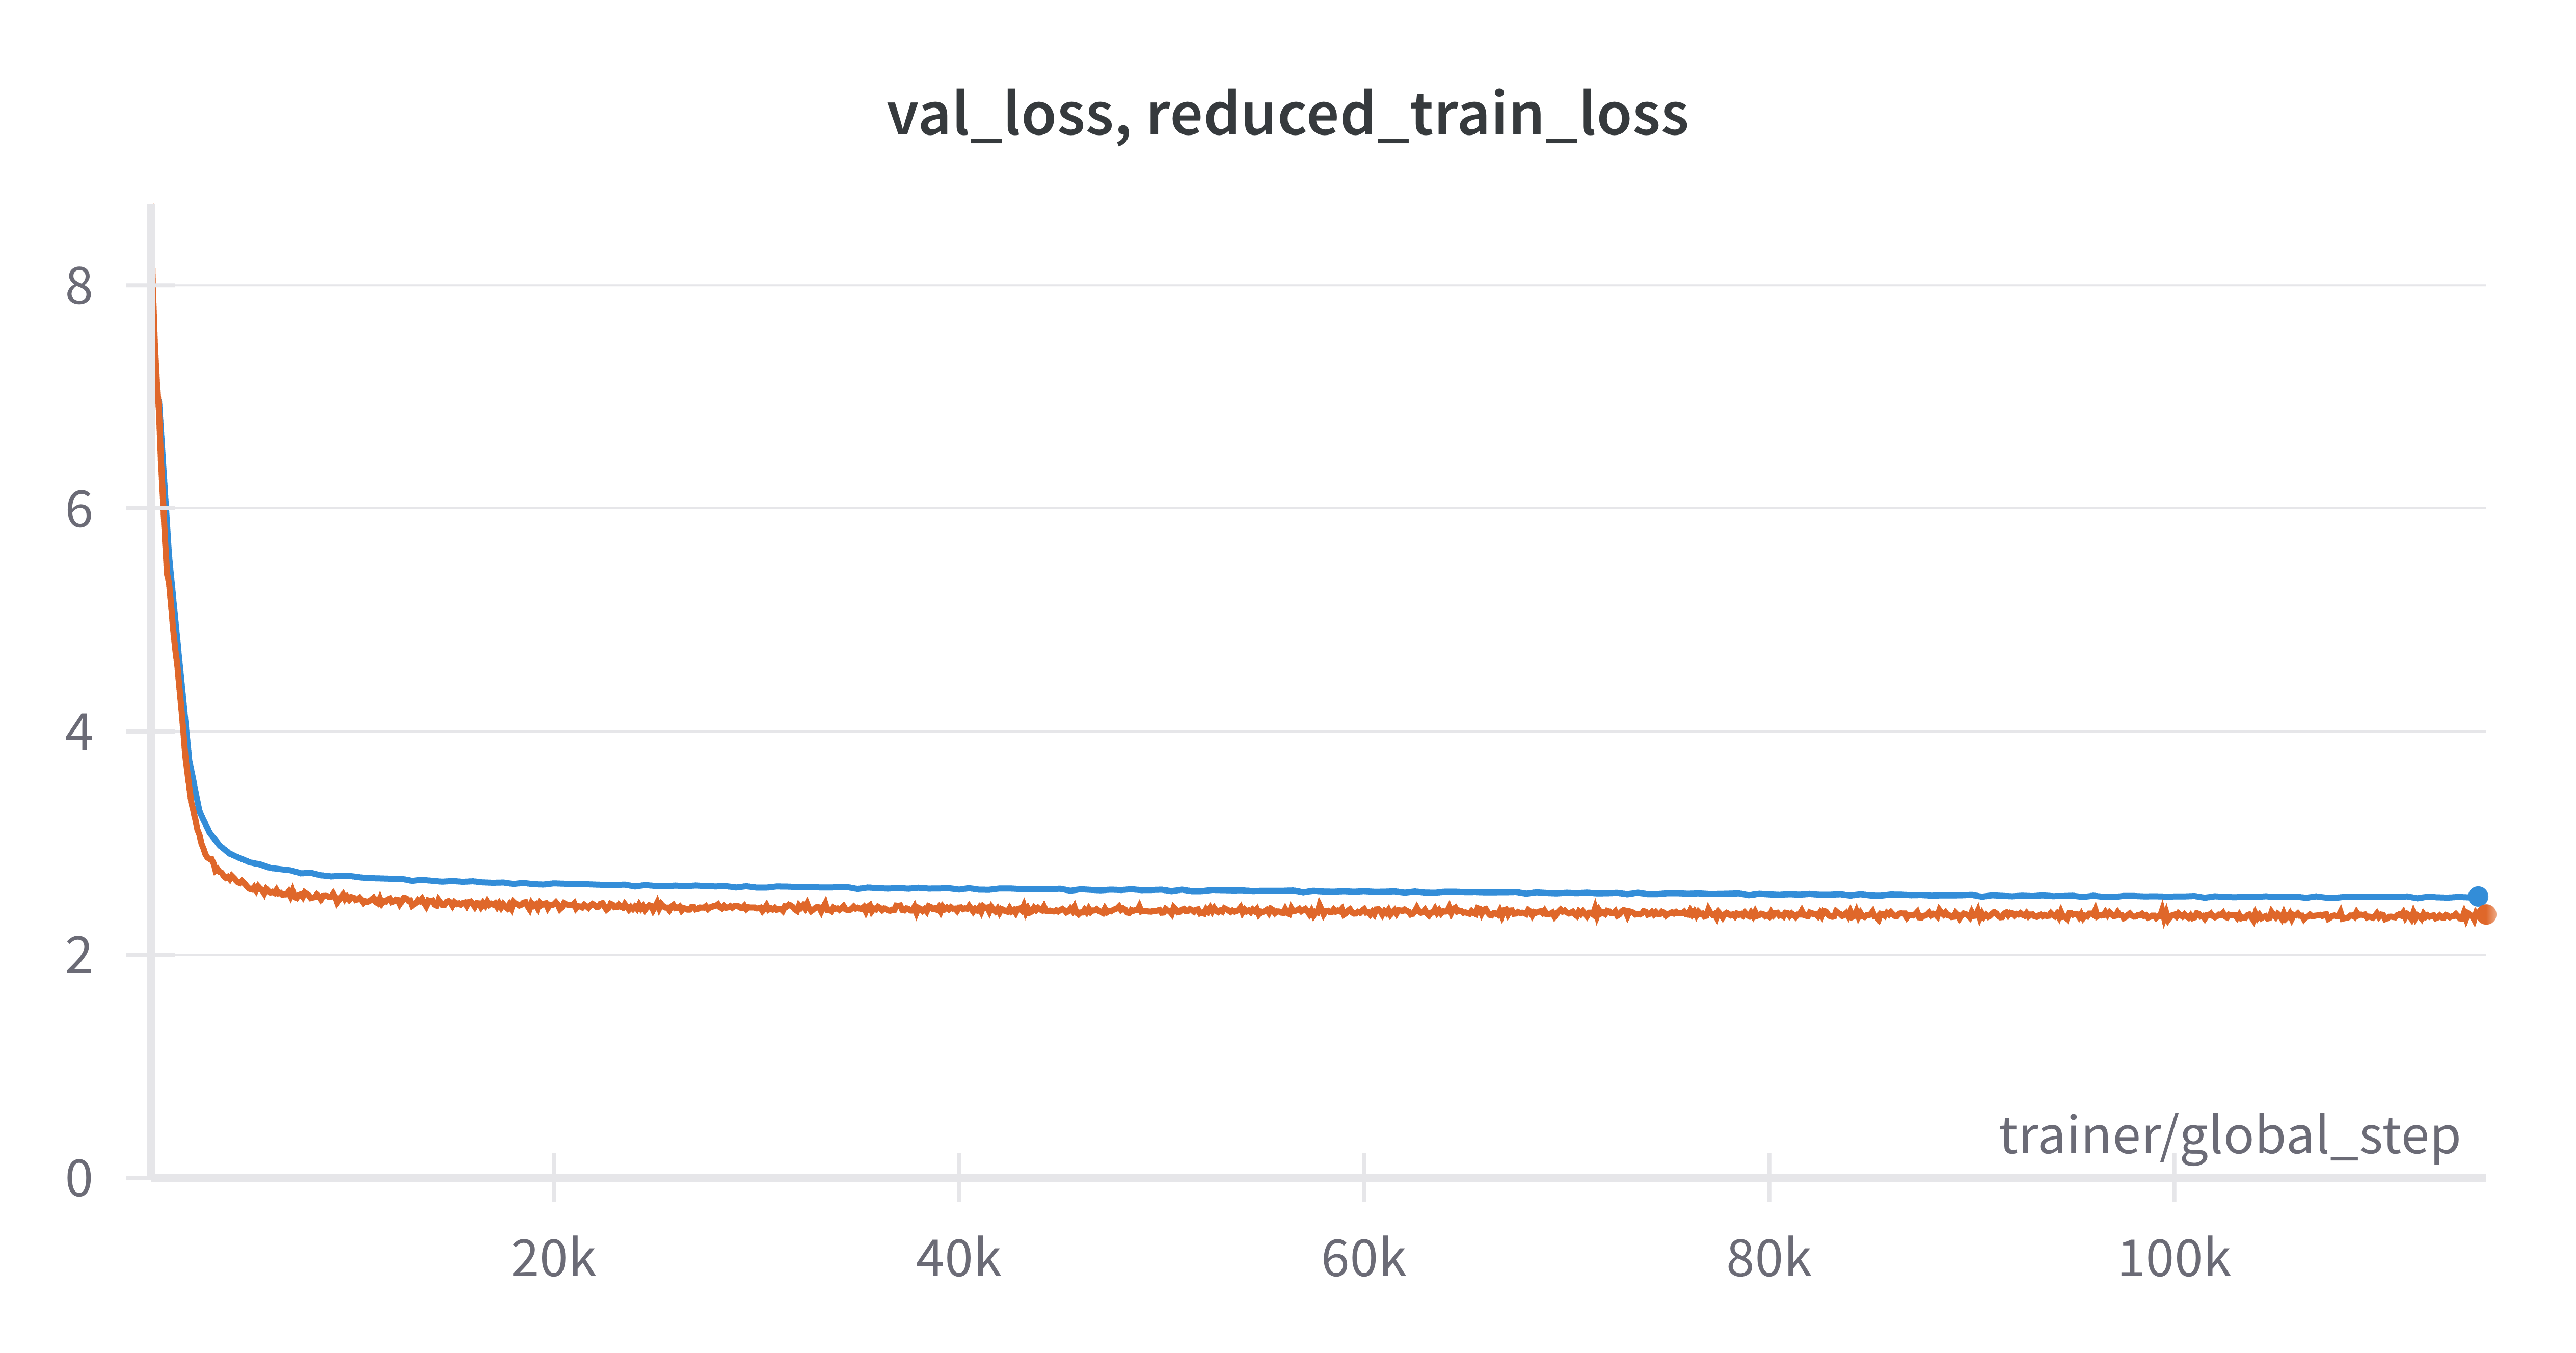 Validation and training losses both decreased smoothly through training